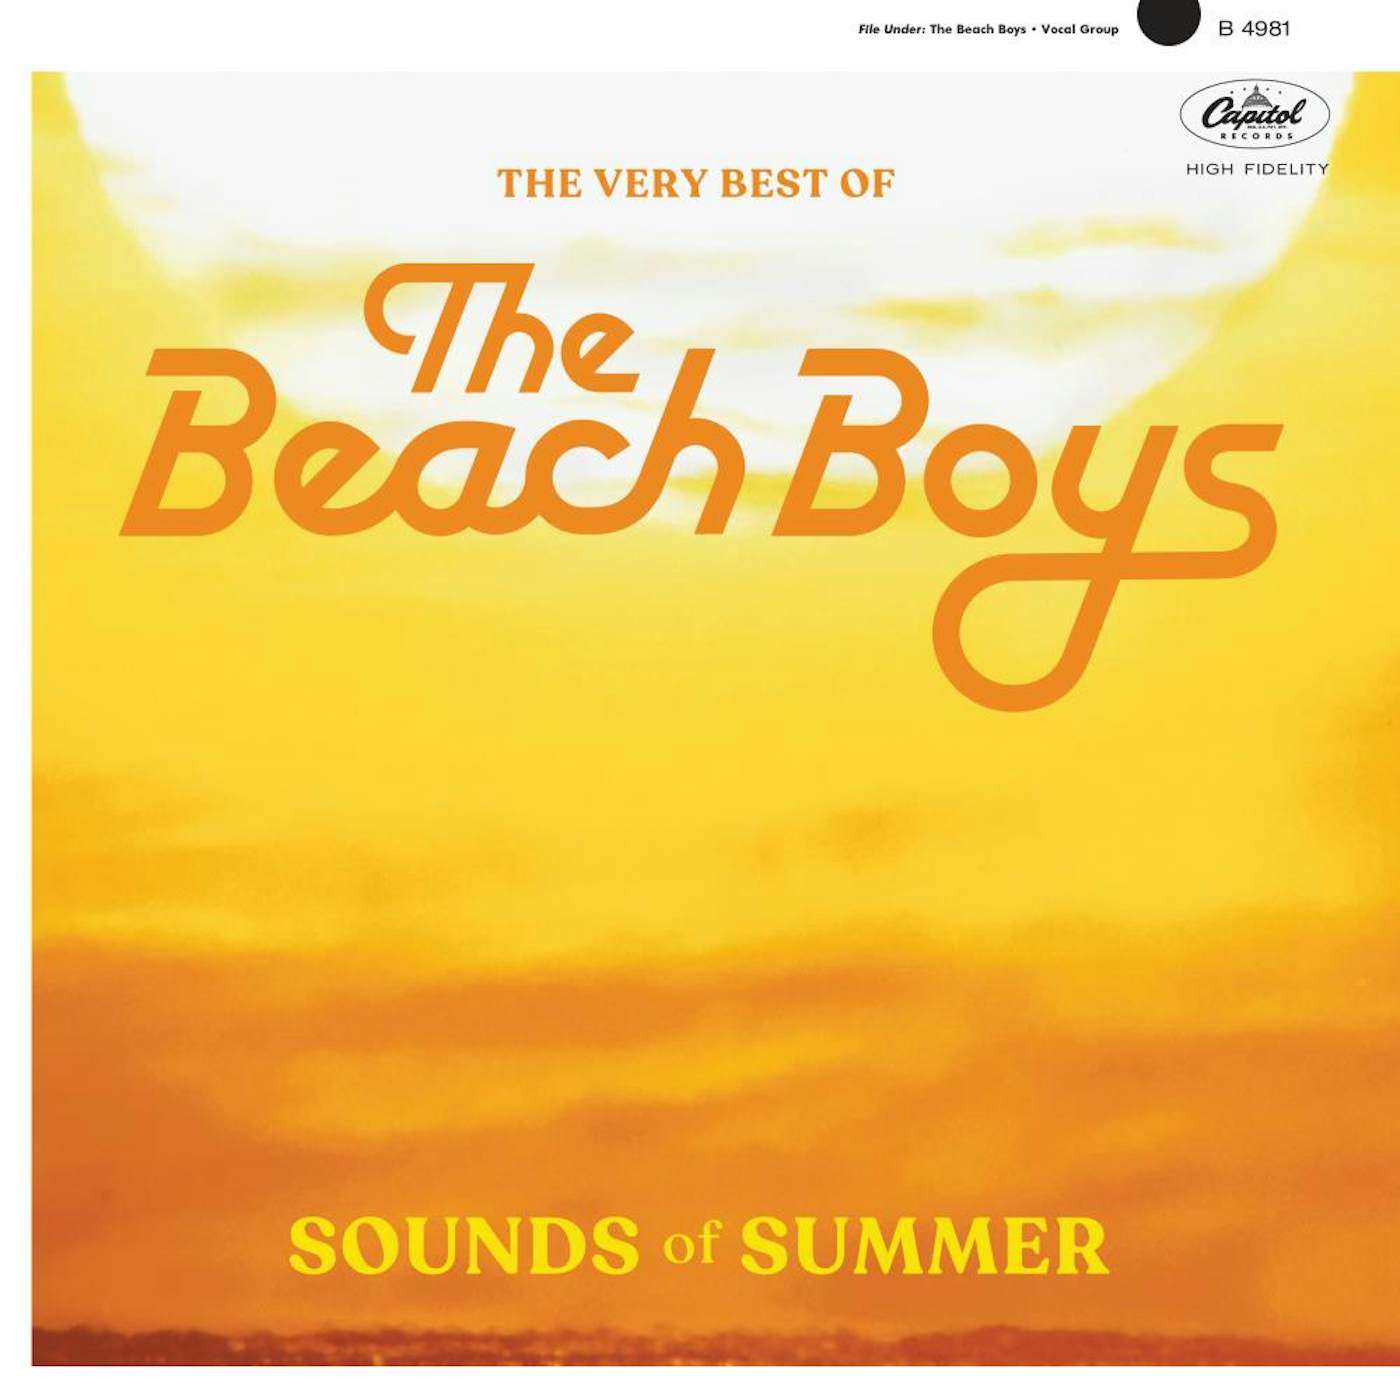 SOUNDS OF SUMMER: THE VERY BEST OF THE BEACH BOYS (REMASTERED) CD